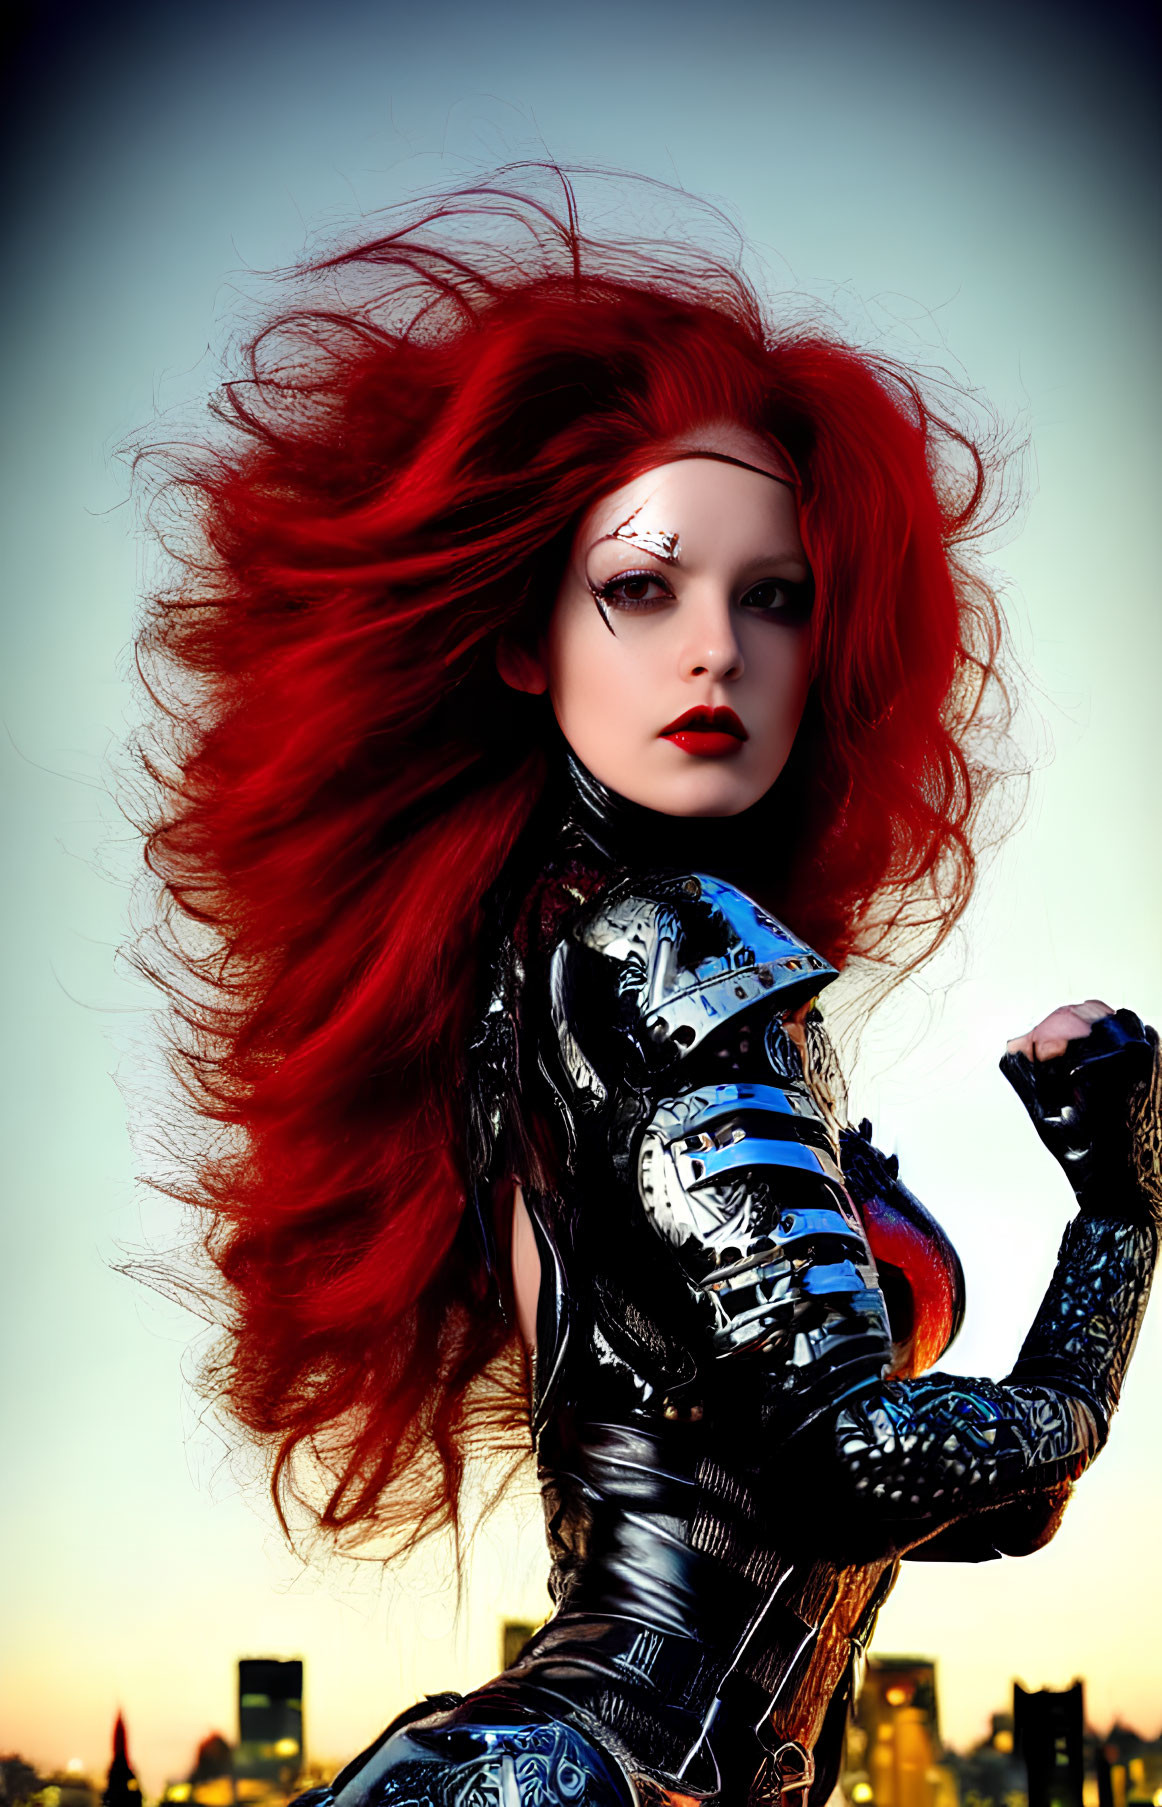 Digital artwork: Woman with red hair in futuristic bodysuit against city skyline